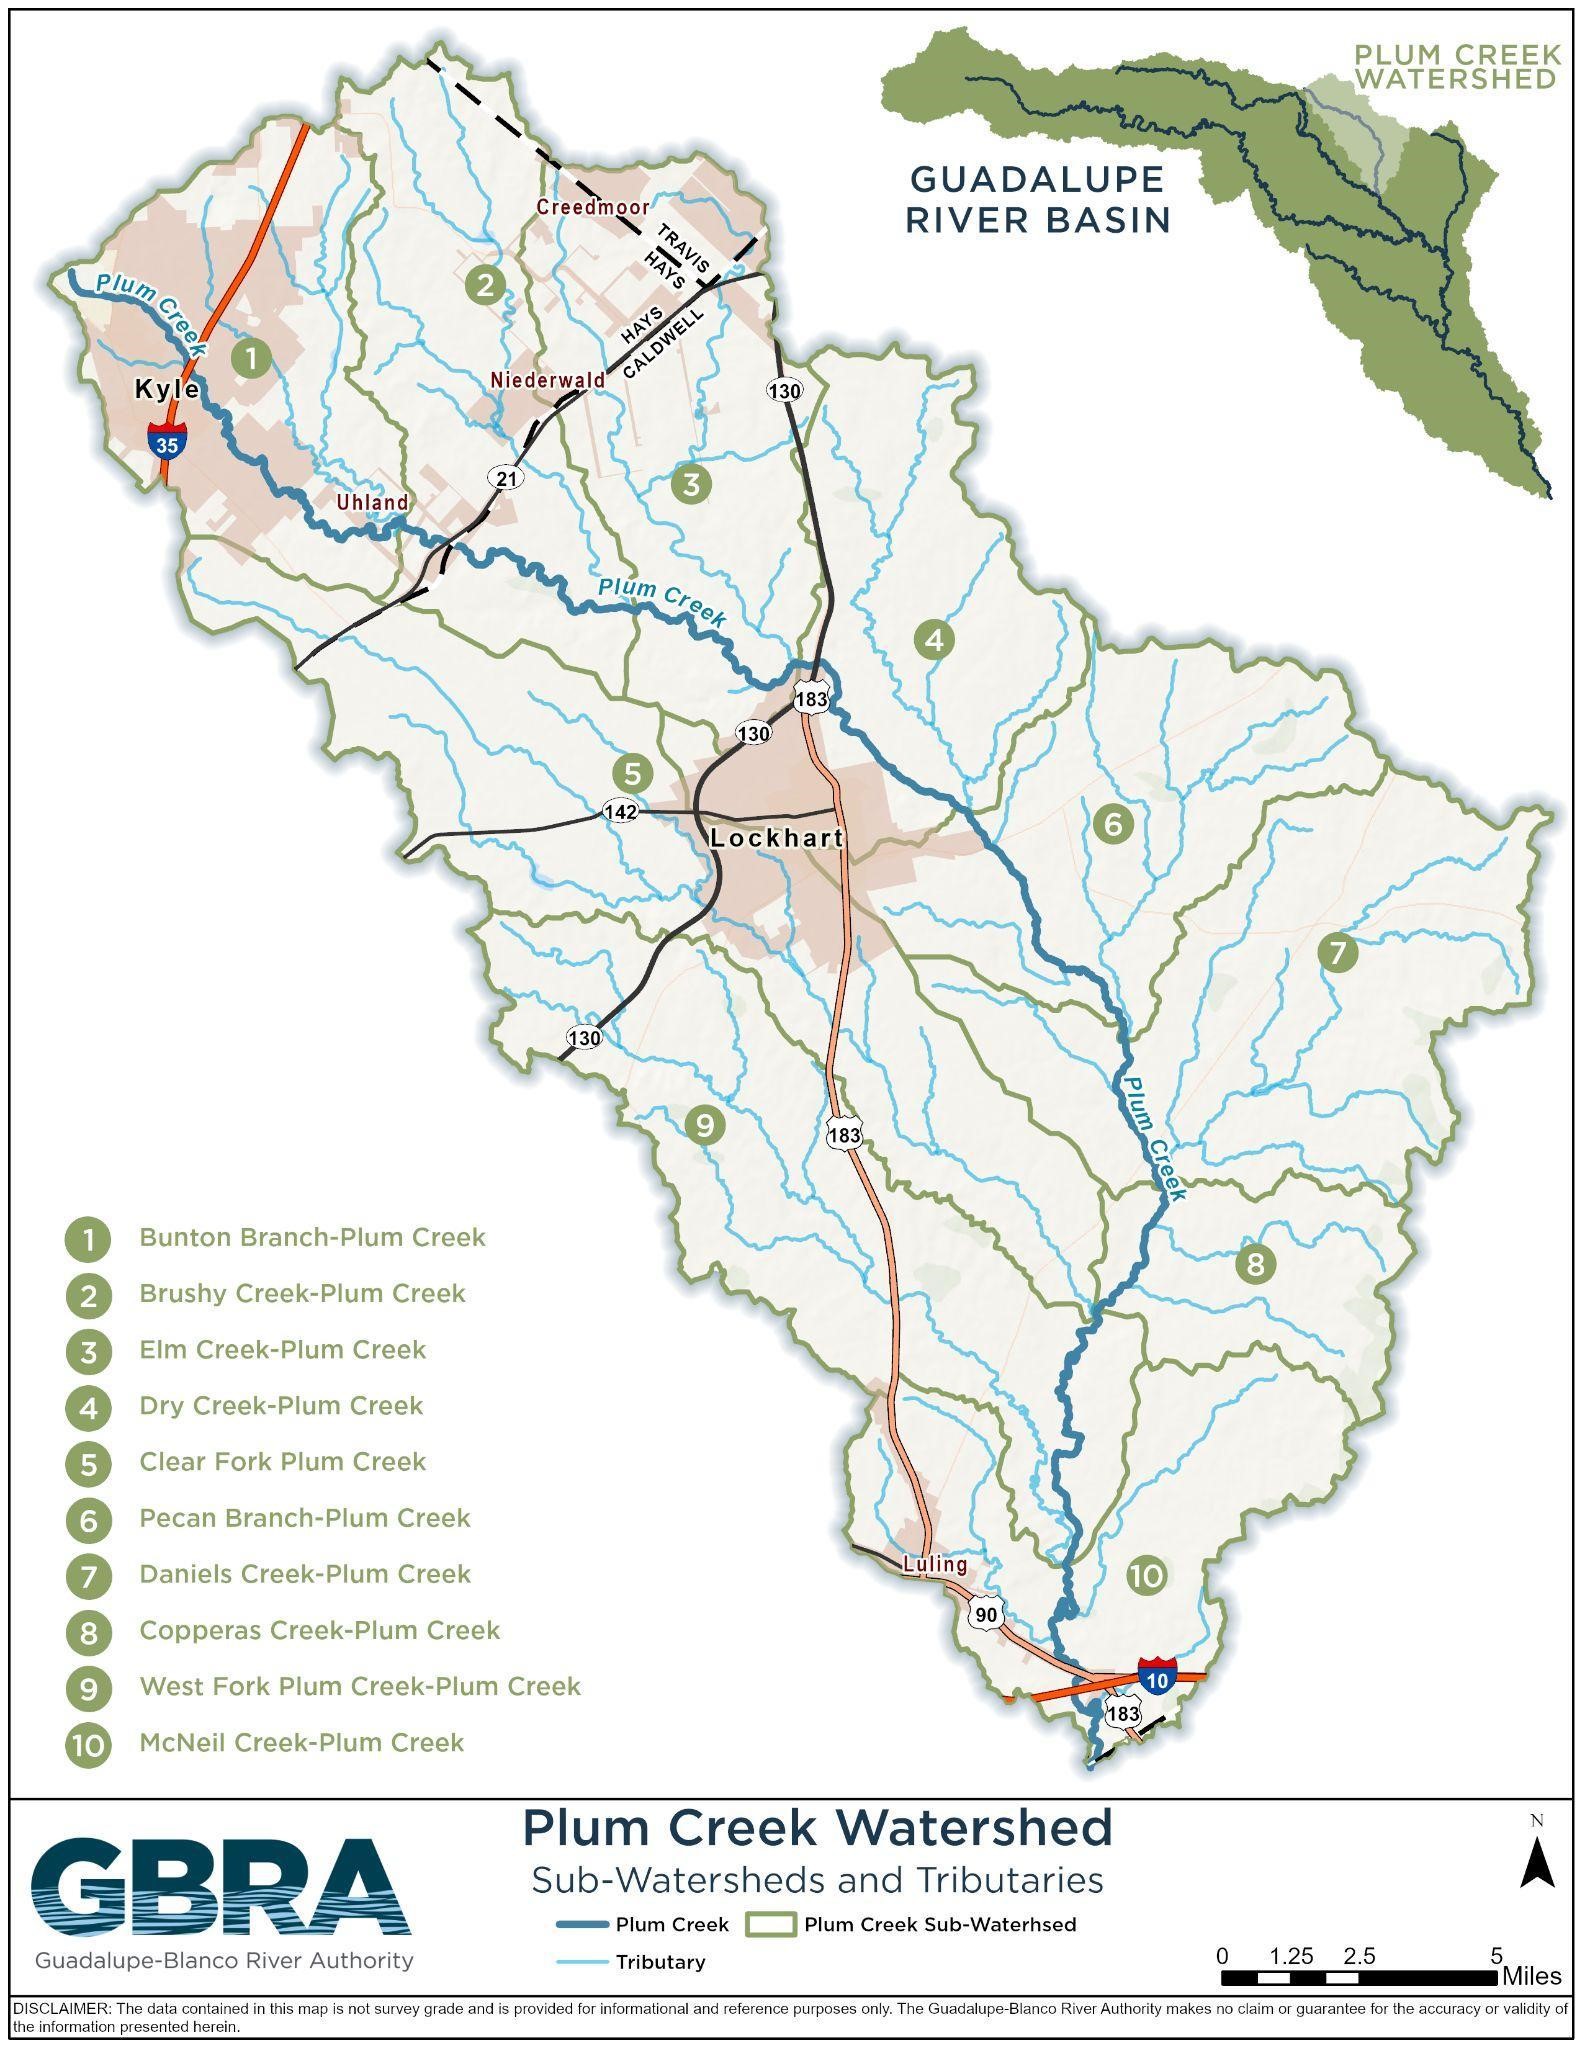 Plum Creek Watershed with Subwatersheds